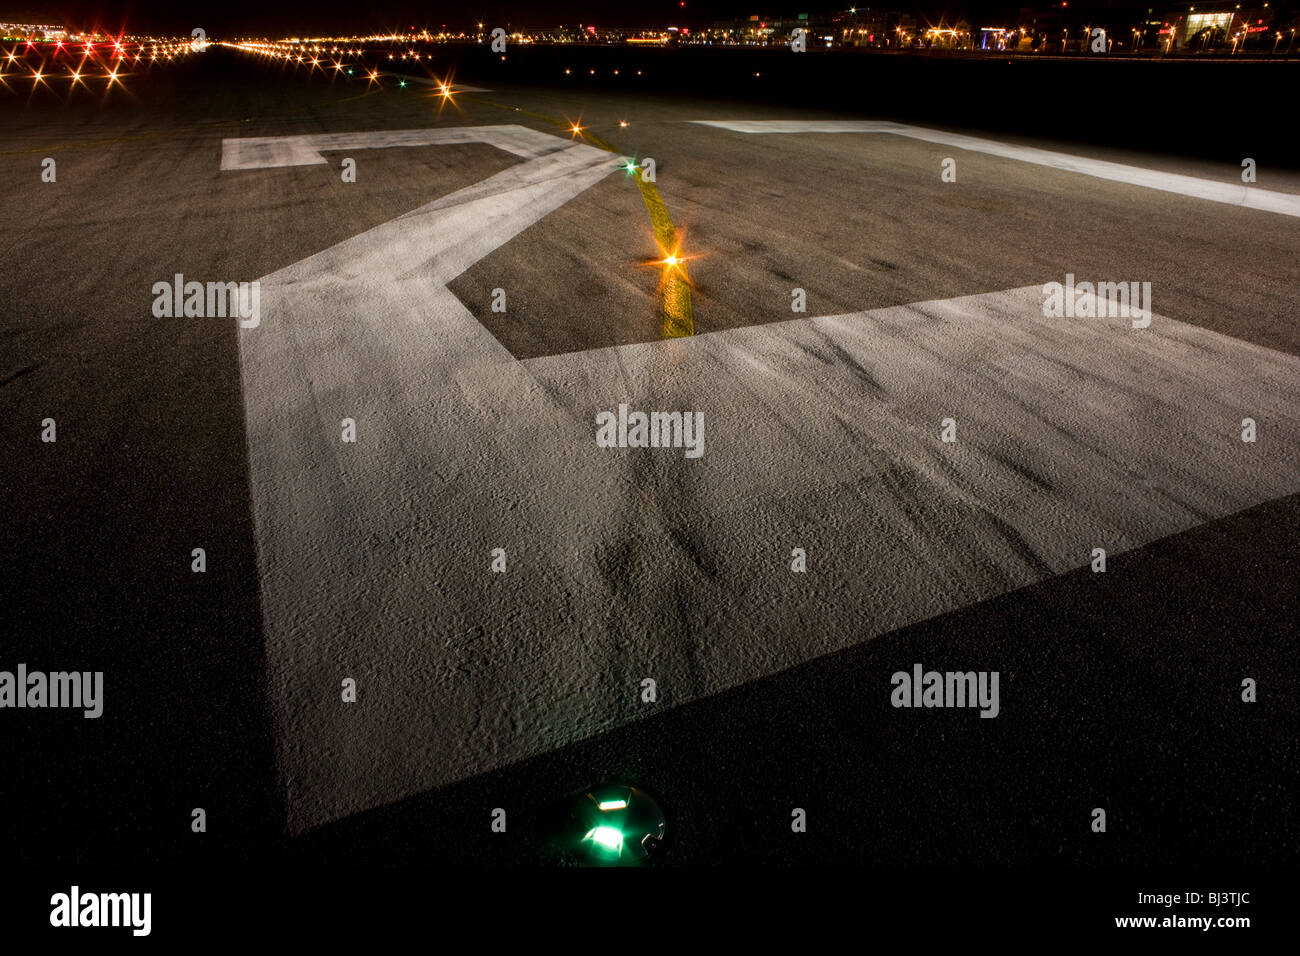 A wide night view looking down on the rubber-stained runway 27R at Heathrow Airport. Stock Photo